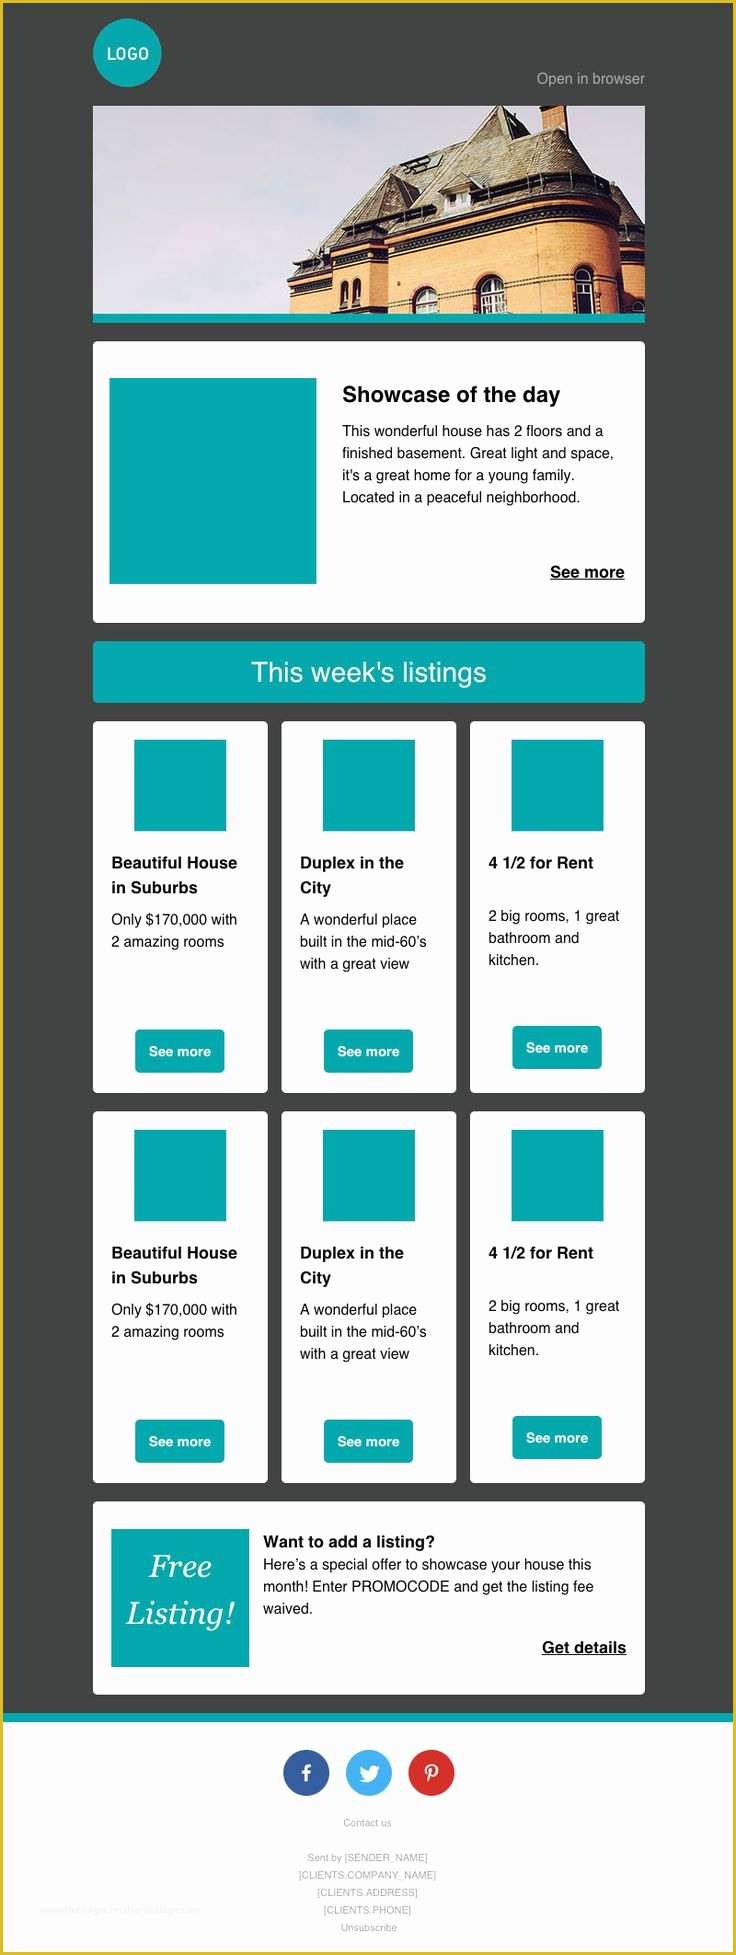 Free Newsletter Templates Of 17 Best Ideas About Free Email Templates On Pinterest